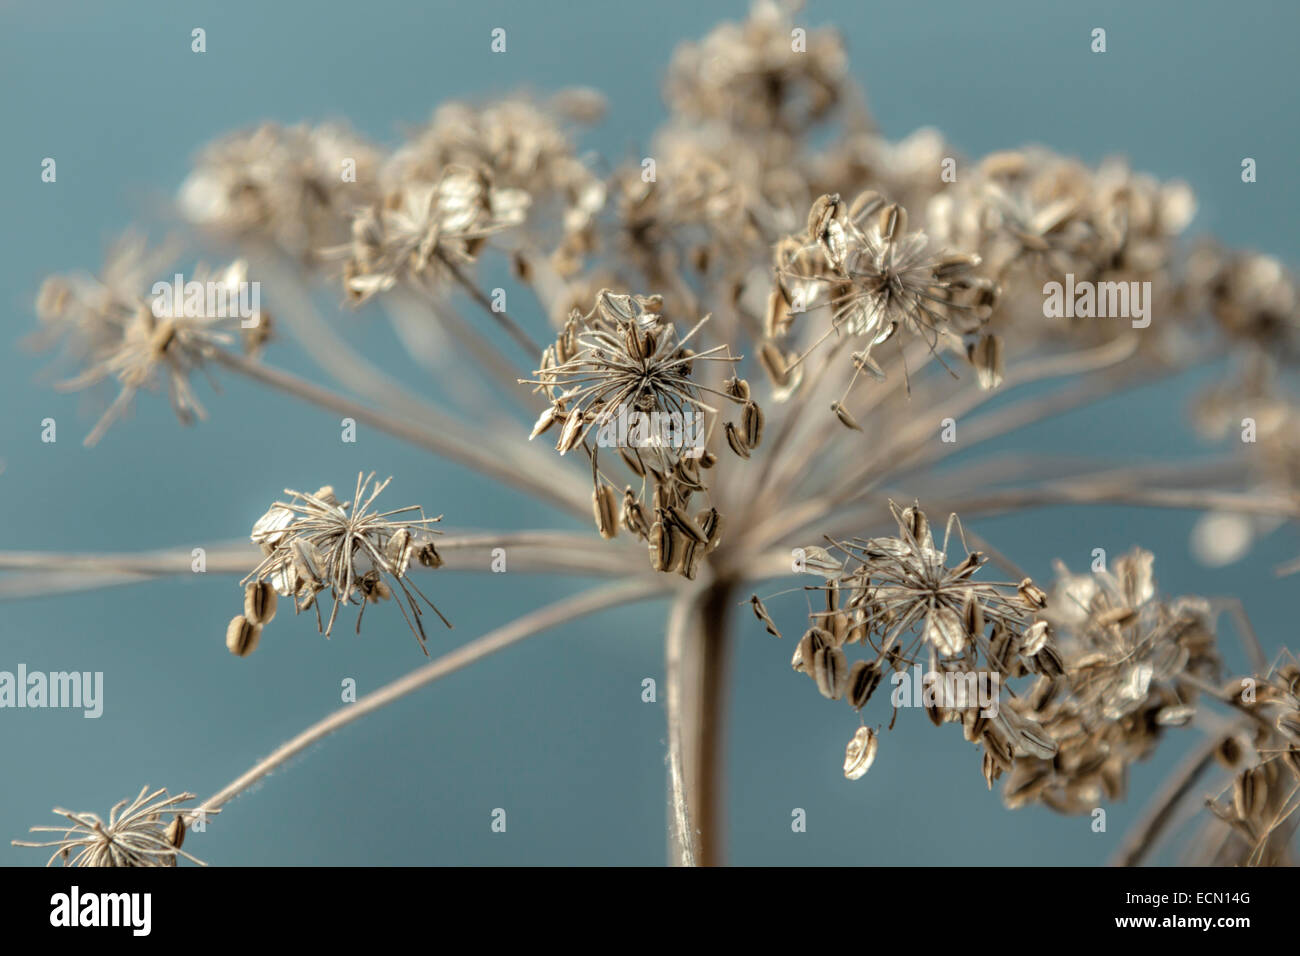 Macro of the last stages of Anthriscus sylvestris known as Cow Parsley, against a soft blue unfocused background. Stock Photo